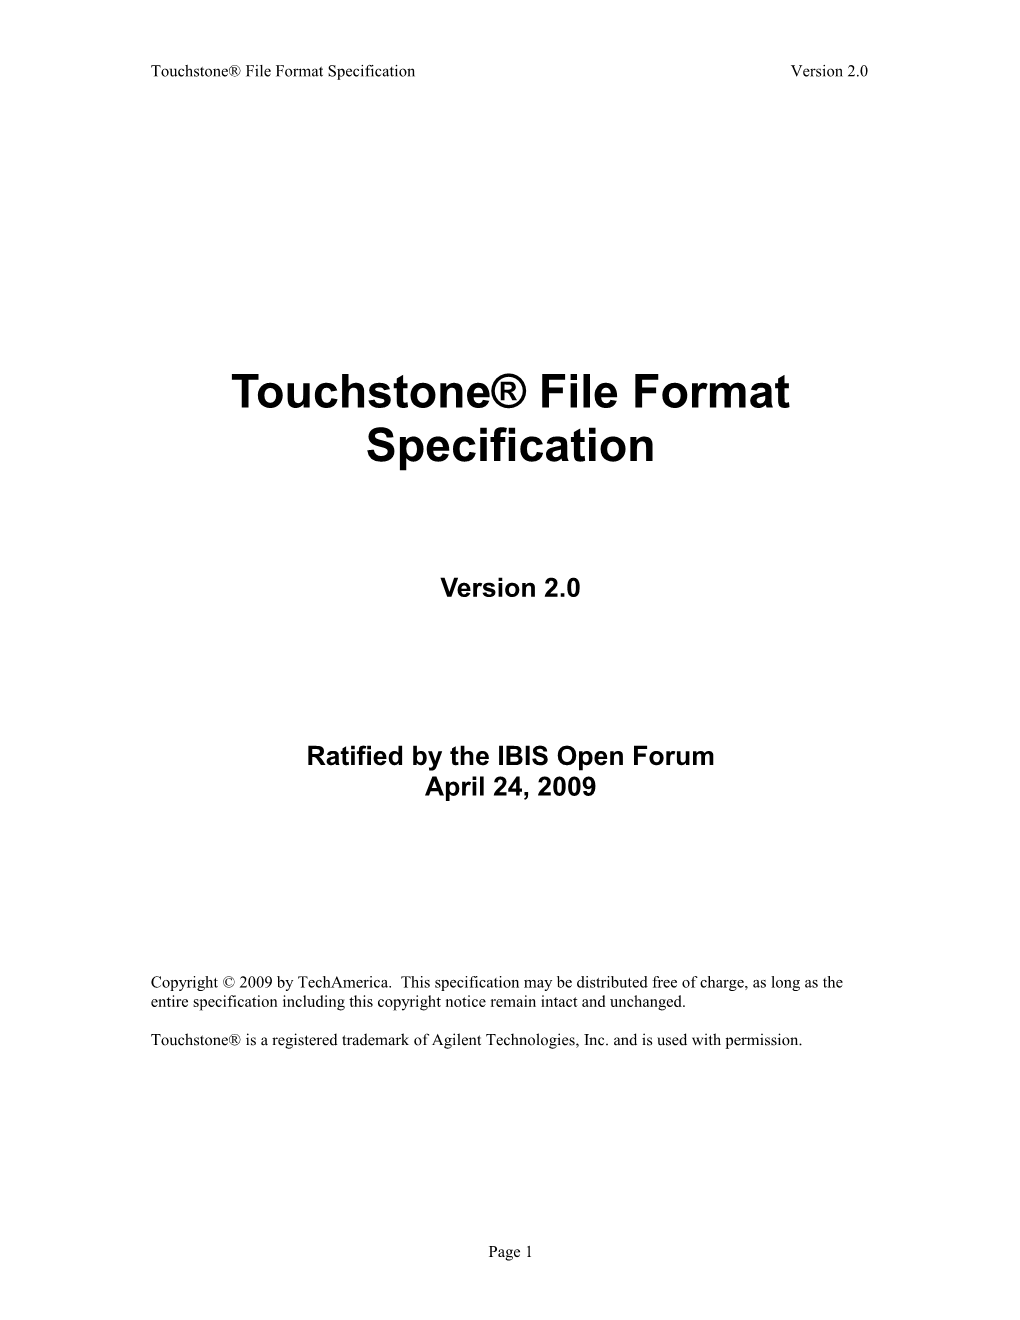 Touchstone File Format Specification